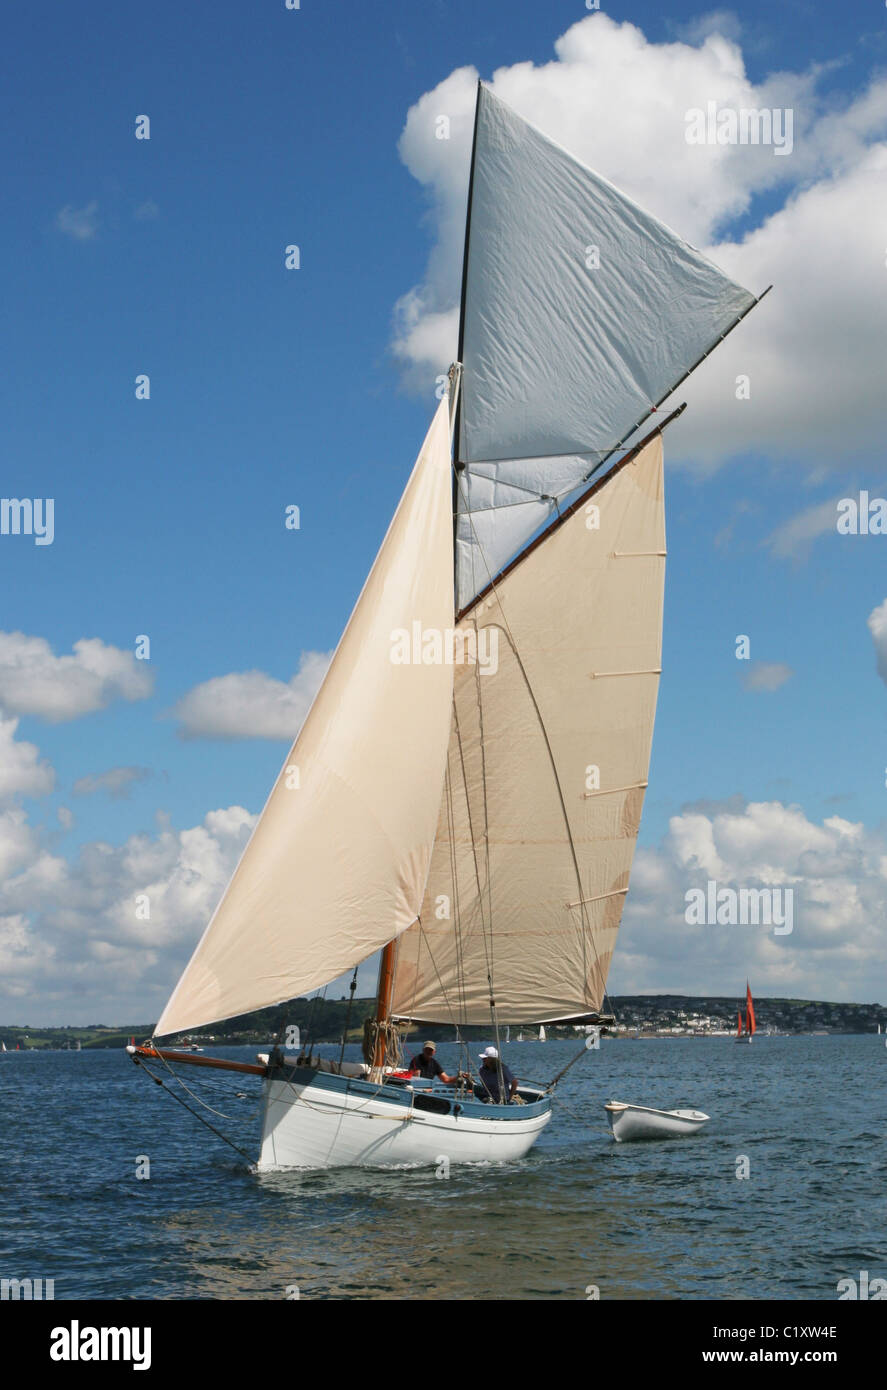 A classic sailing yacht in full sail Stock Photo